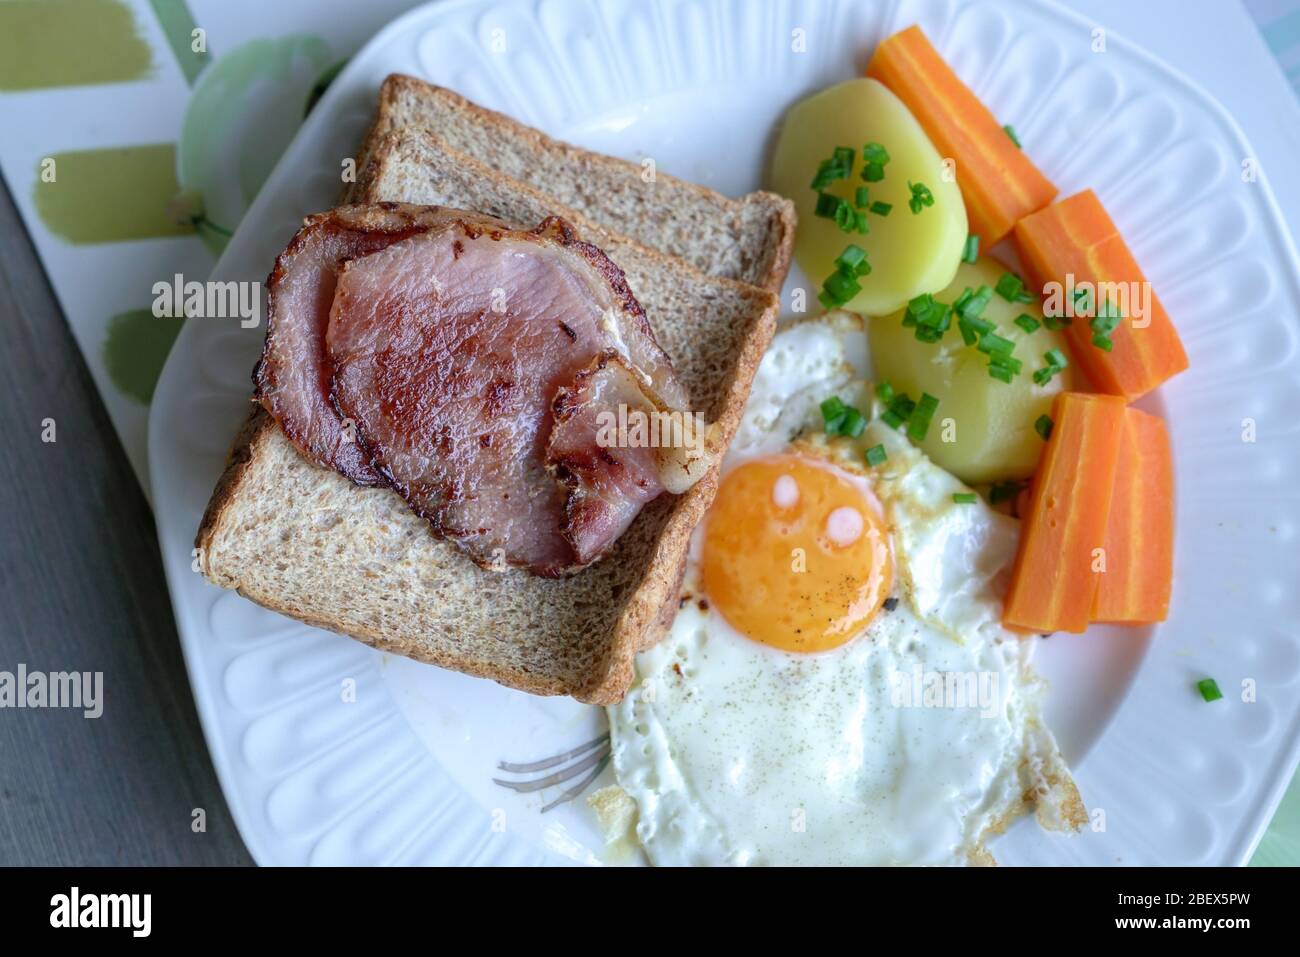 Breakfast with bacon, egg, potatoes, carrots and bread. Top view. Stock Photo